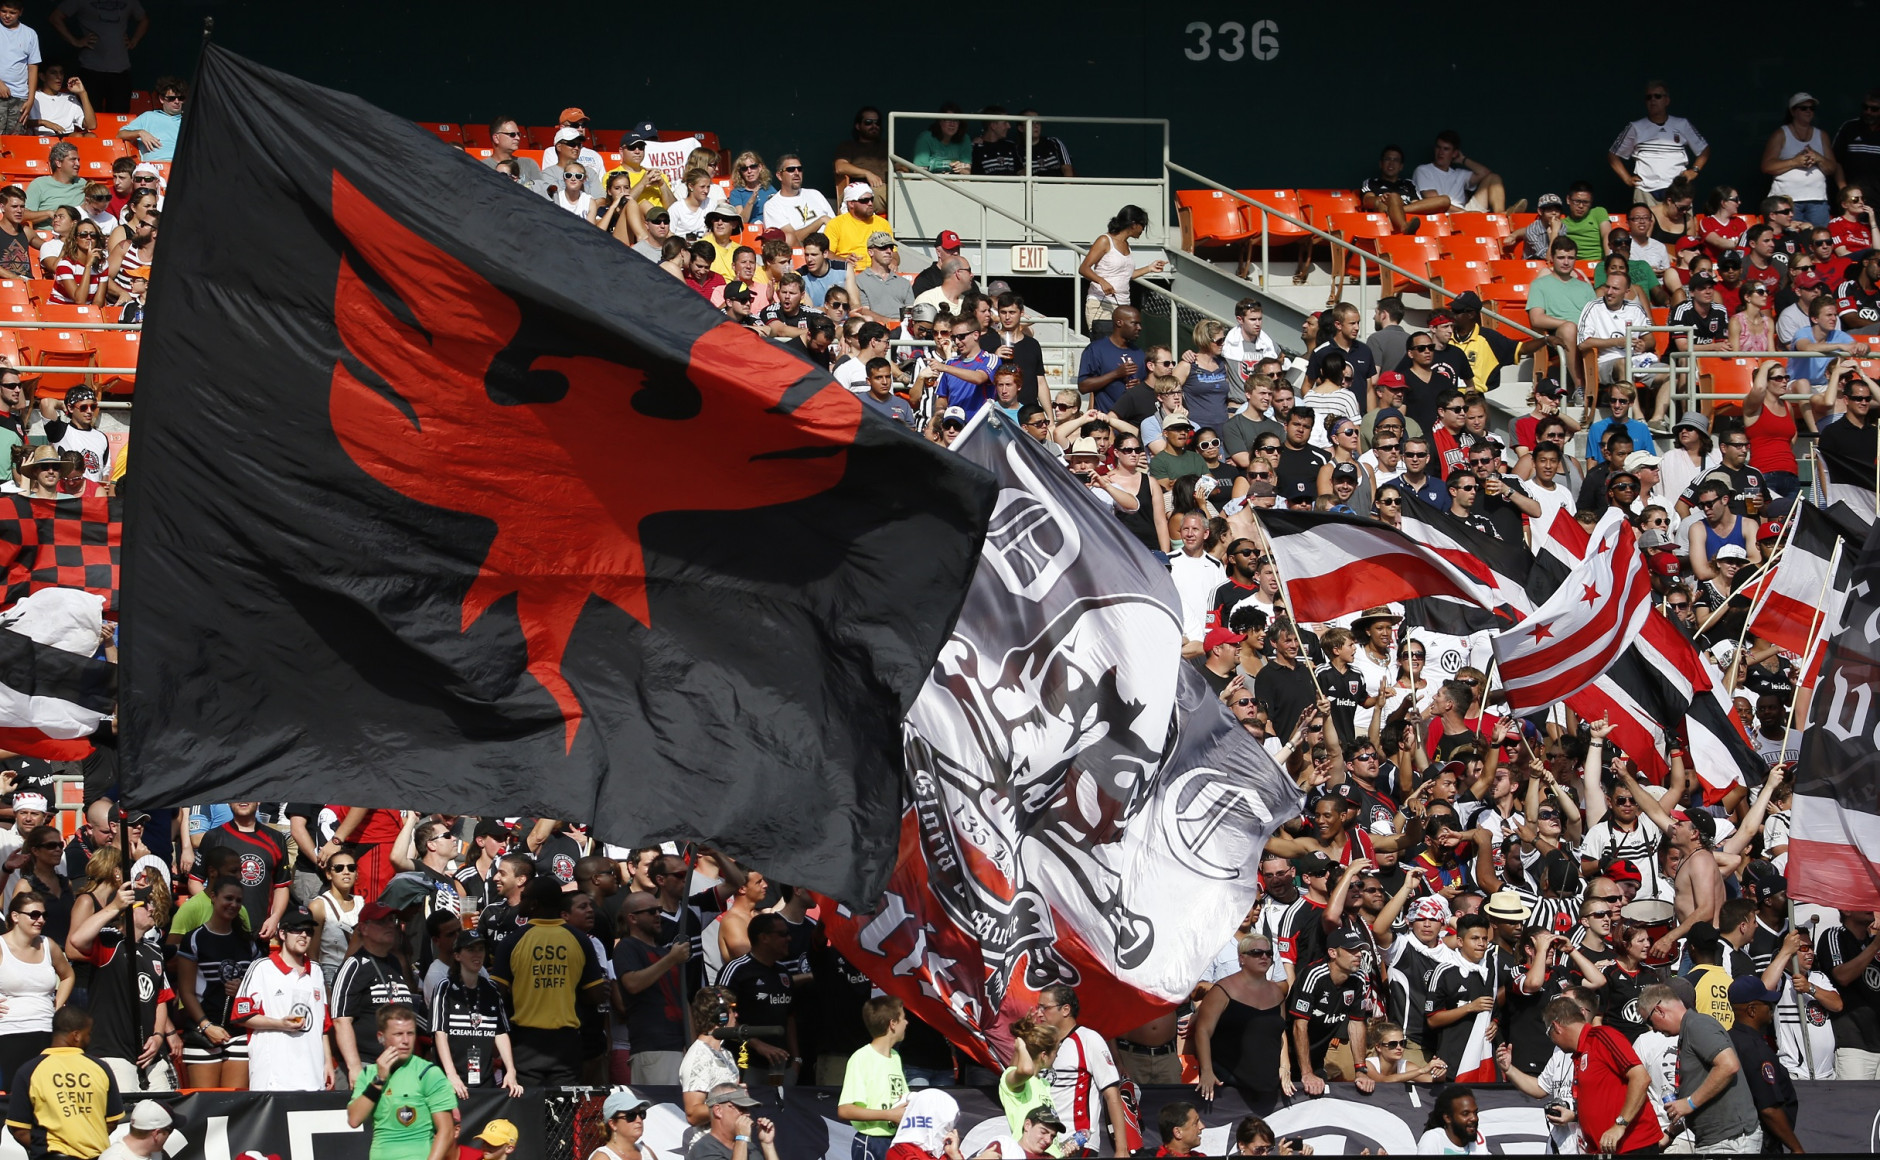 D.C. United fans cheer during the second half of an MLS soccer match against the New York Red Bulls, at RFK Stadium, Sunday, Aug. 31, 2014, in Washington. United won 2-0. (AP Photo/Alex Brandon)